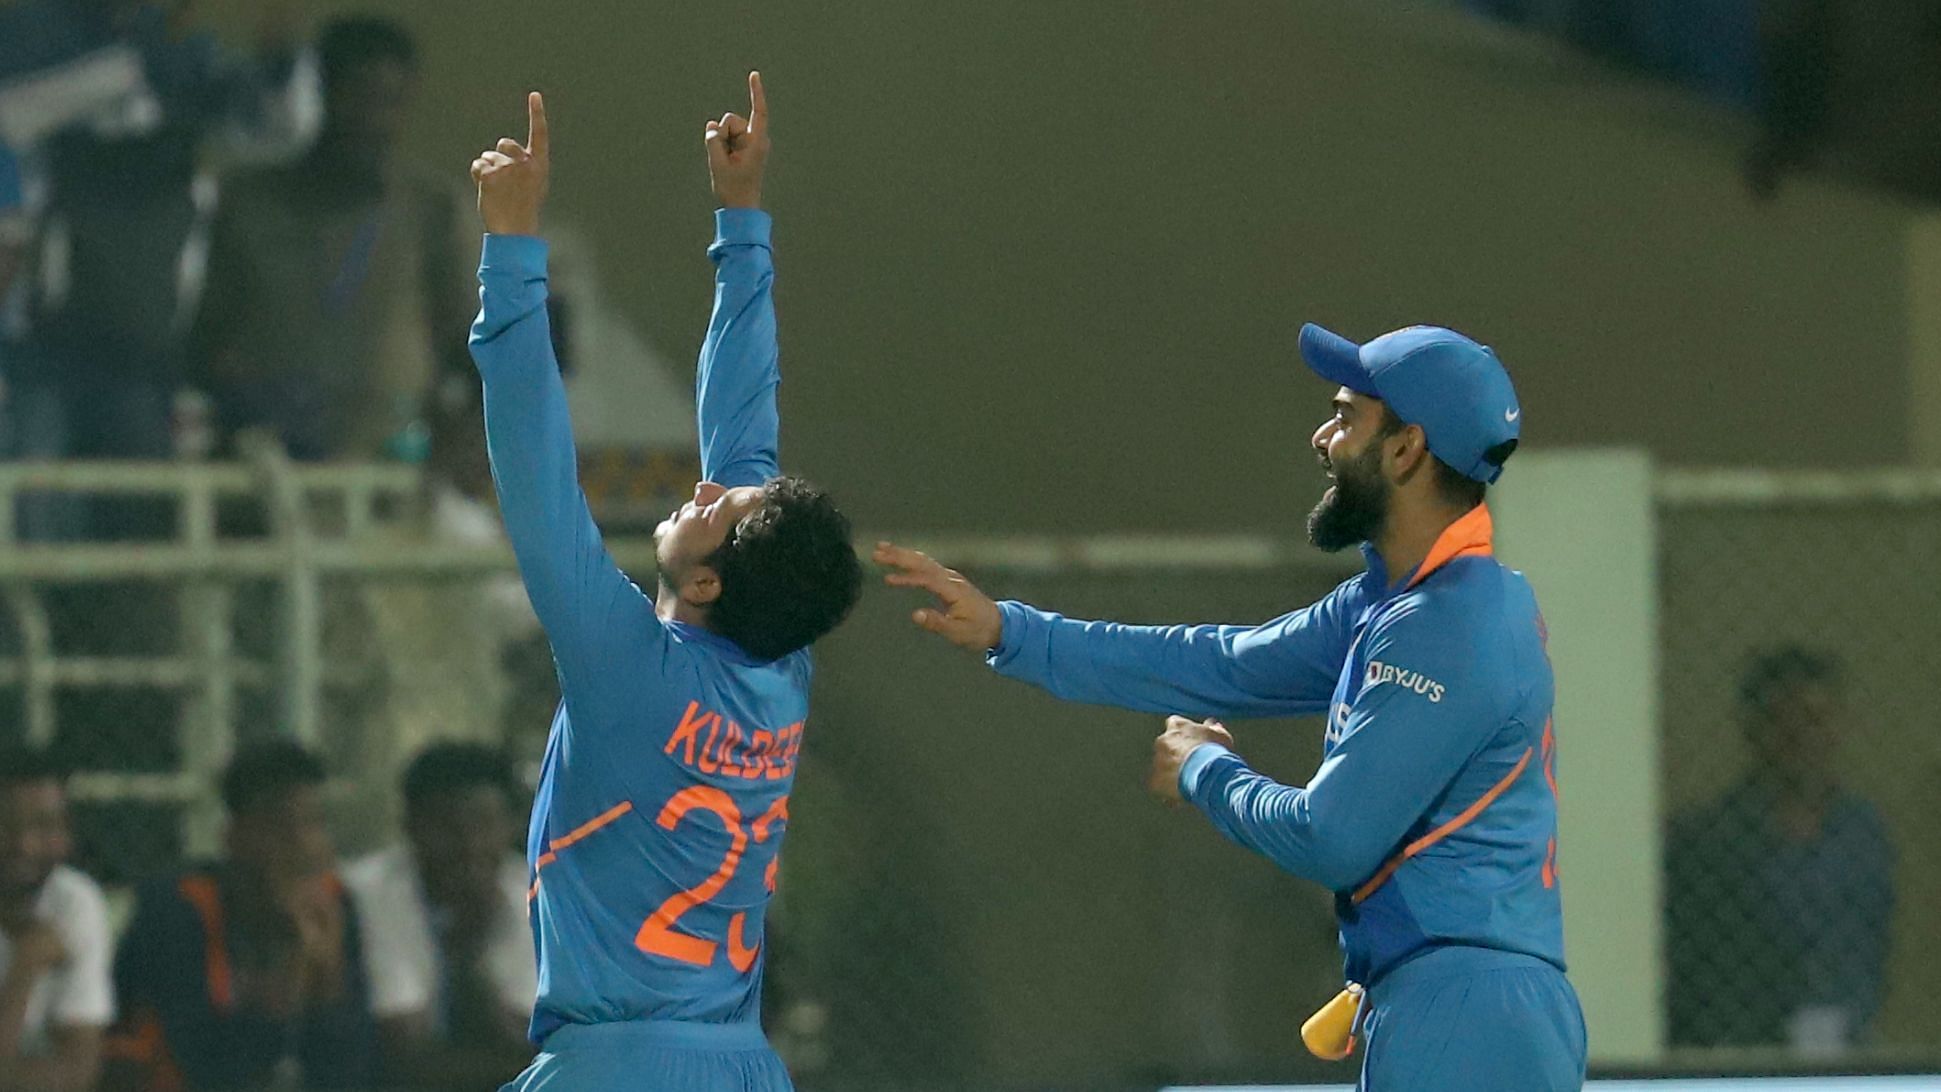 Kuldeep Yadav of India celebrates the hat trick wicket of Alzarri Joseph of West Indies during the 2nd ODI between India and the West Indies held at the ACA-VDCA Stadium, Visakhapatnam on the 18th December 2019.